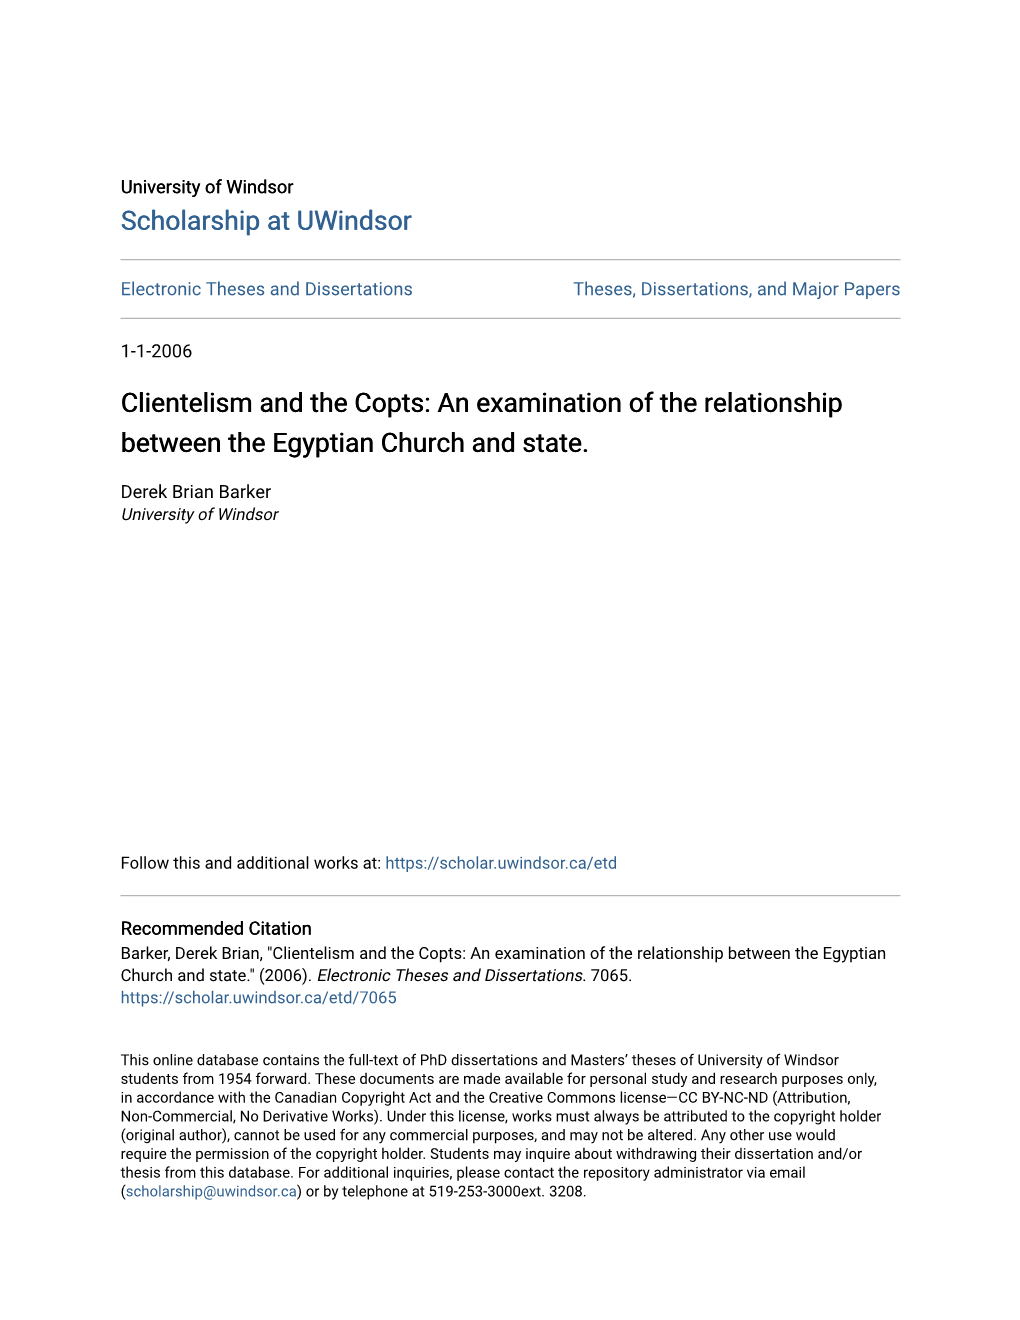 Clientelism and the Copts: an Examination of the Relationship Between the Egyptian Church and State